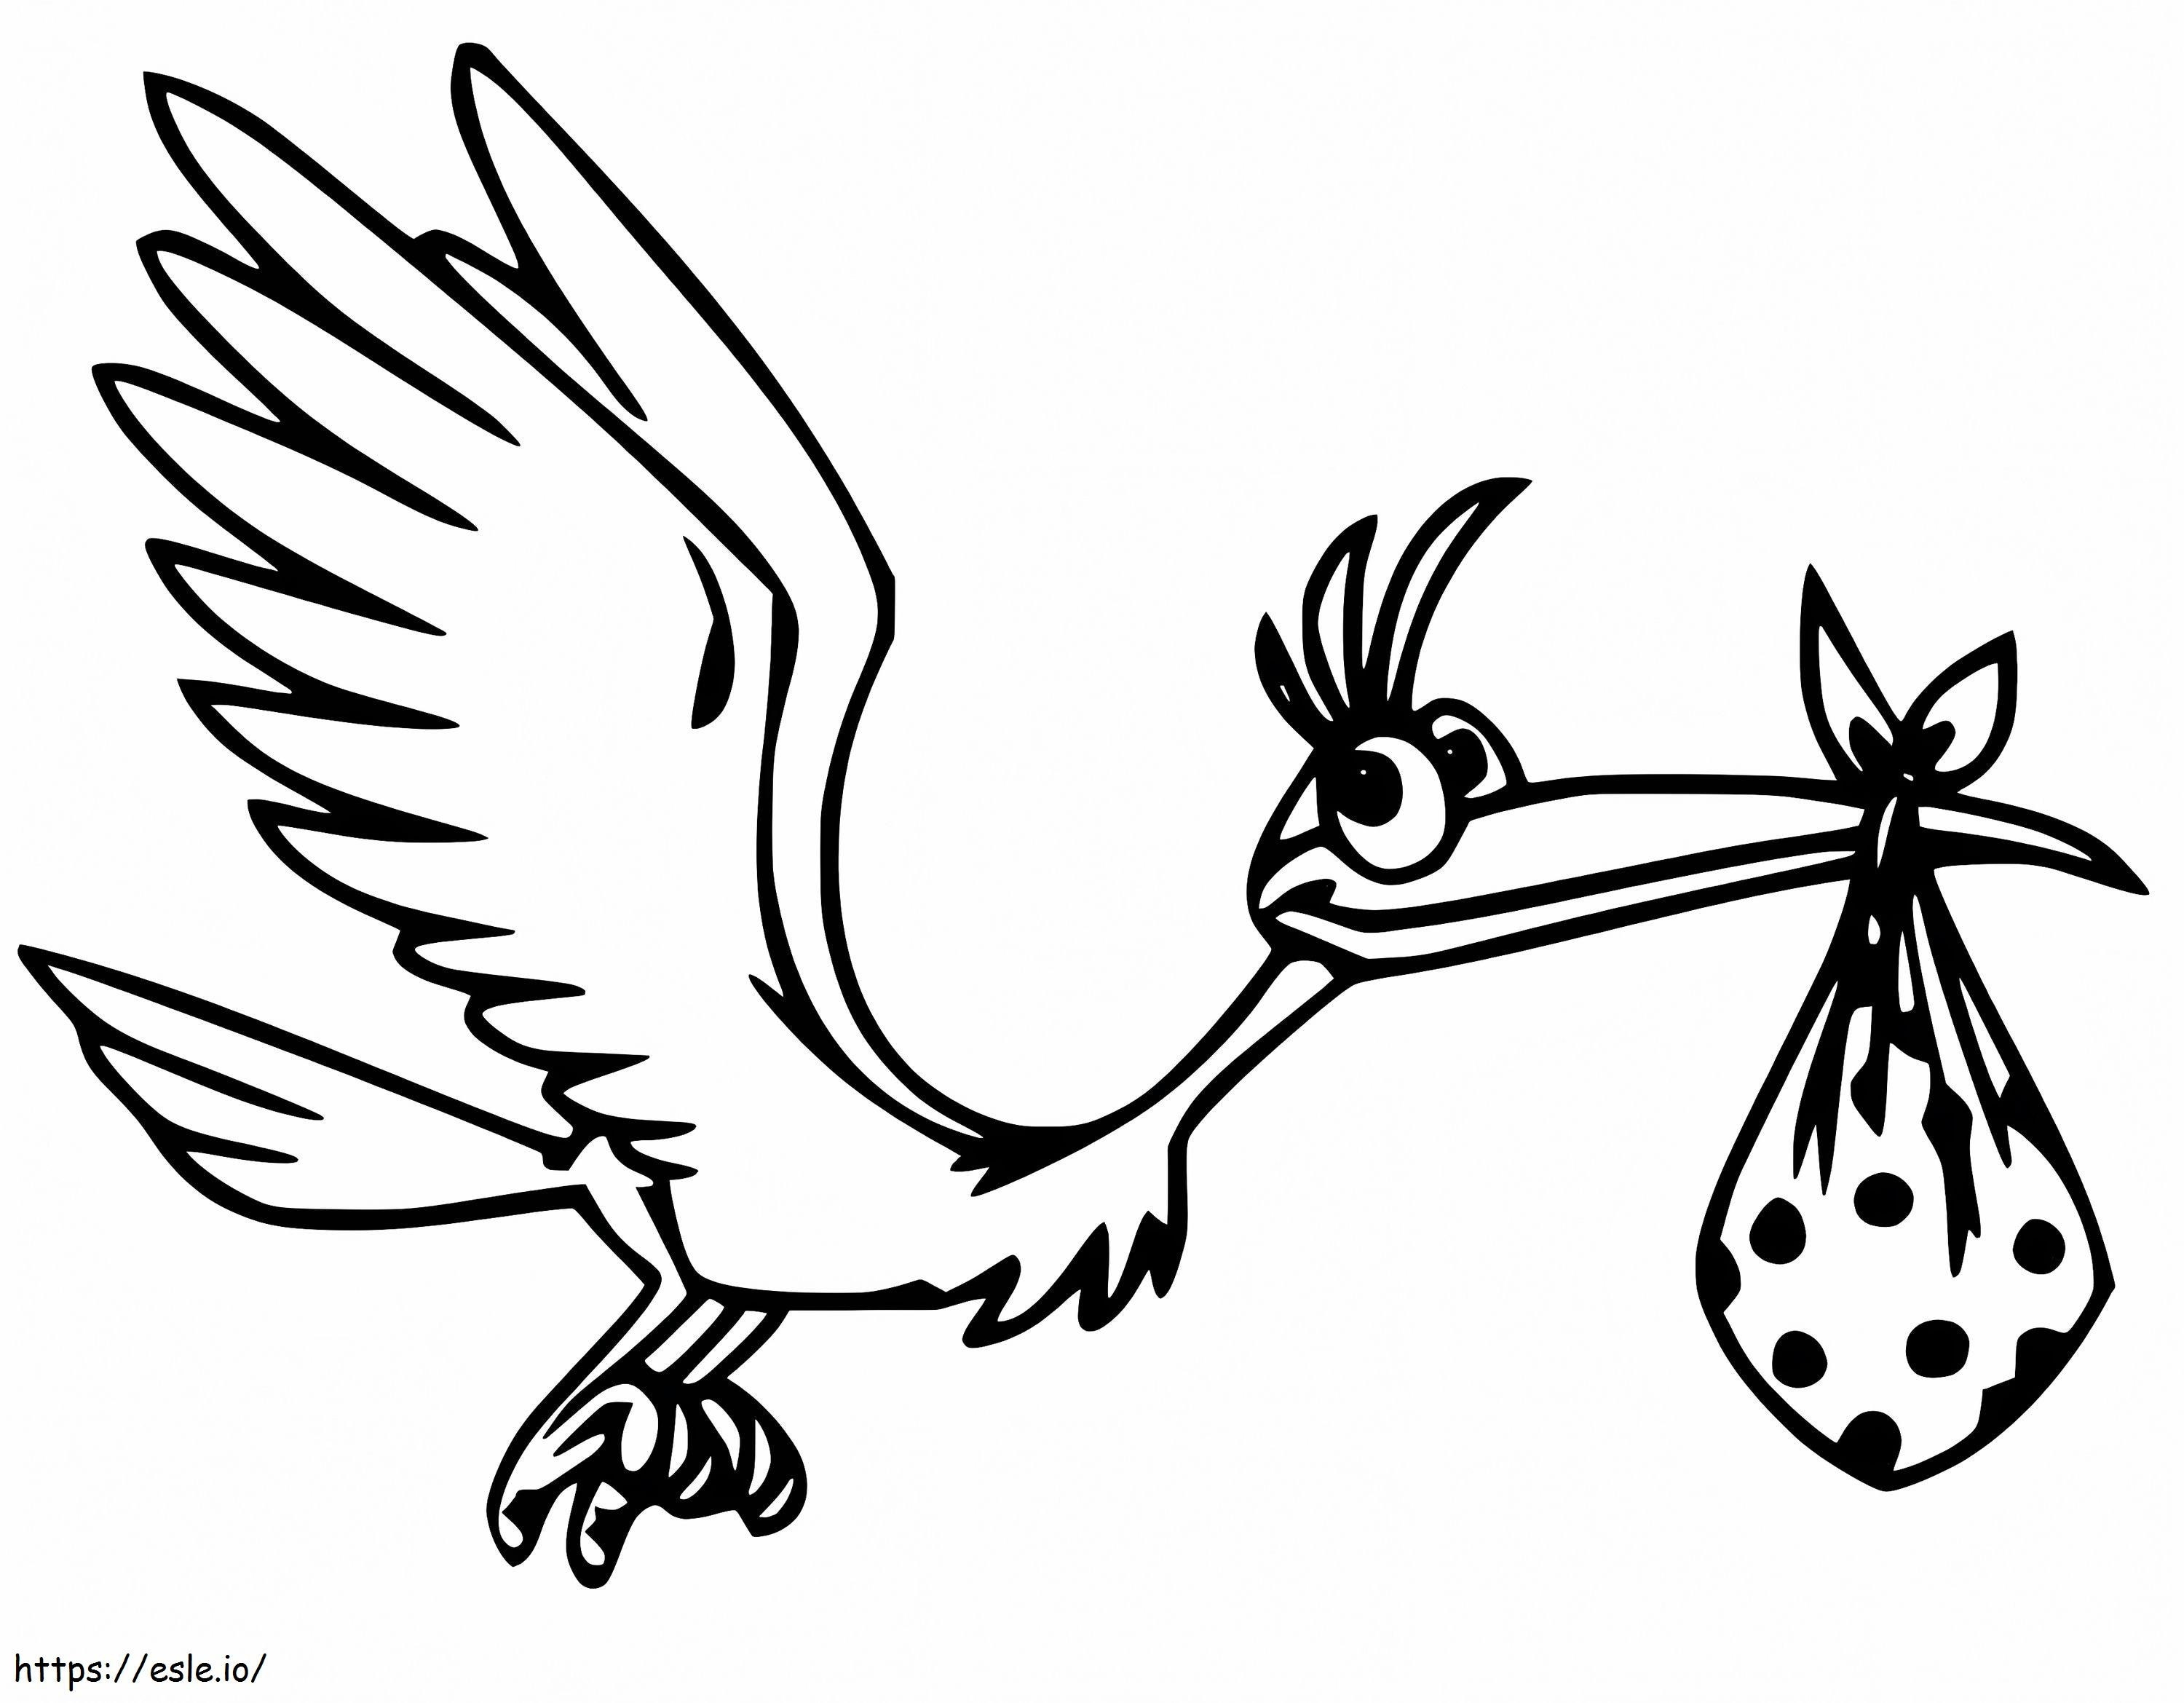 Funny Stork Delivering Baby coloring page